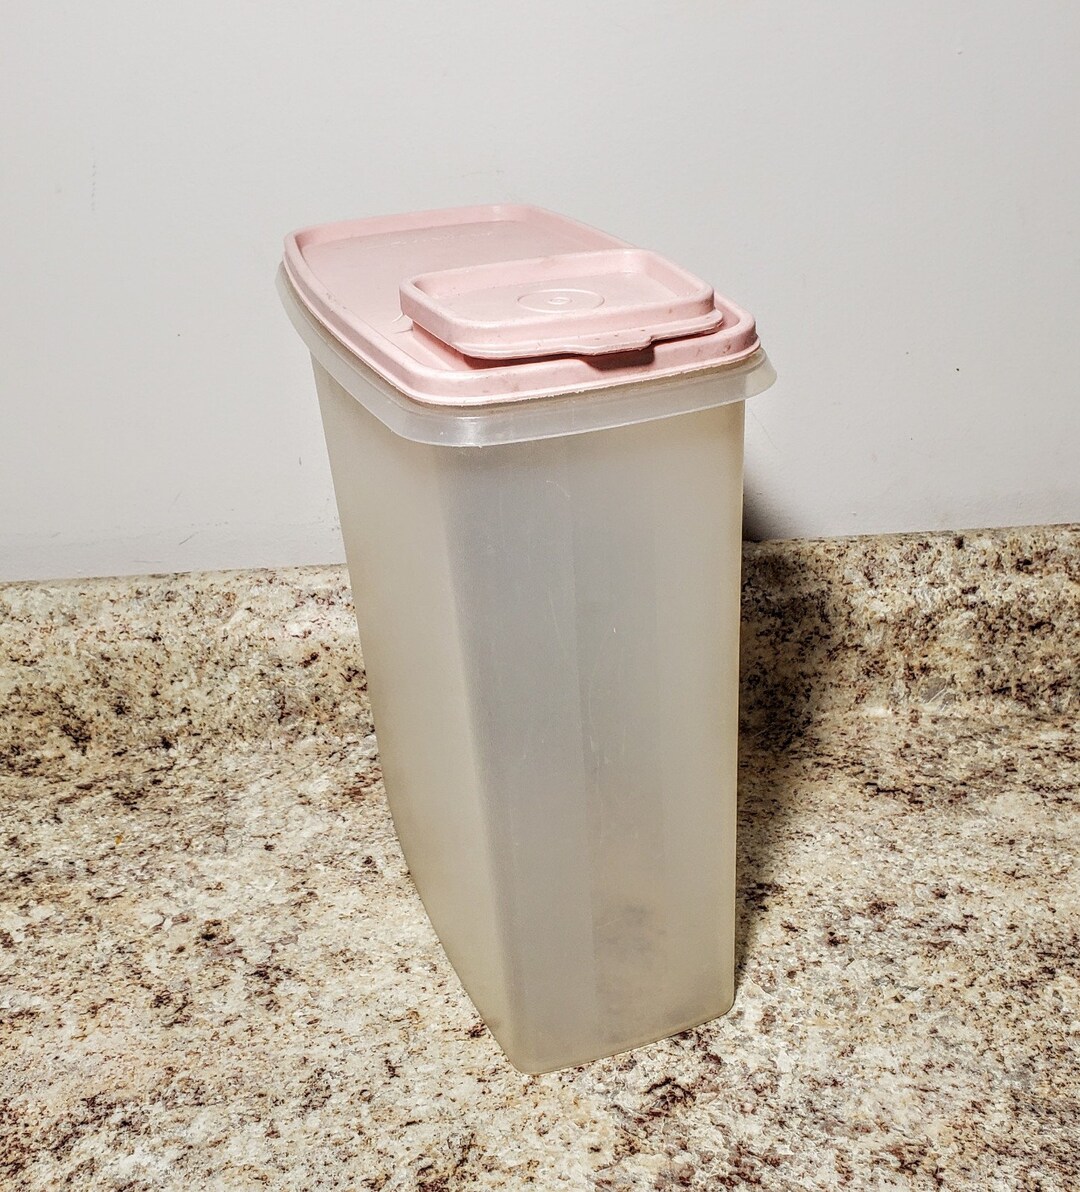 Tupperware Lunch N Things Divided Container Craft Storage